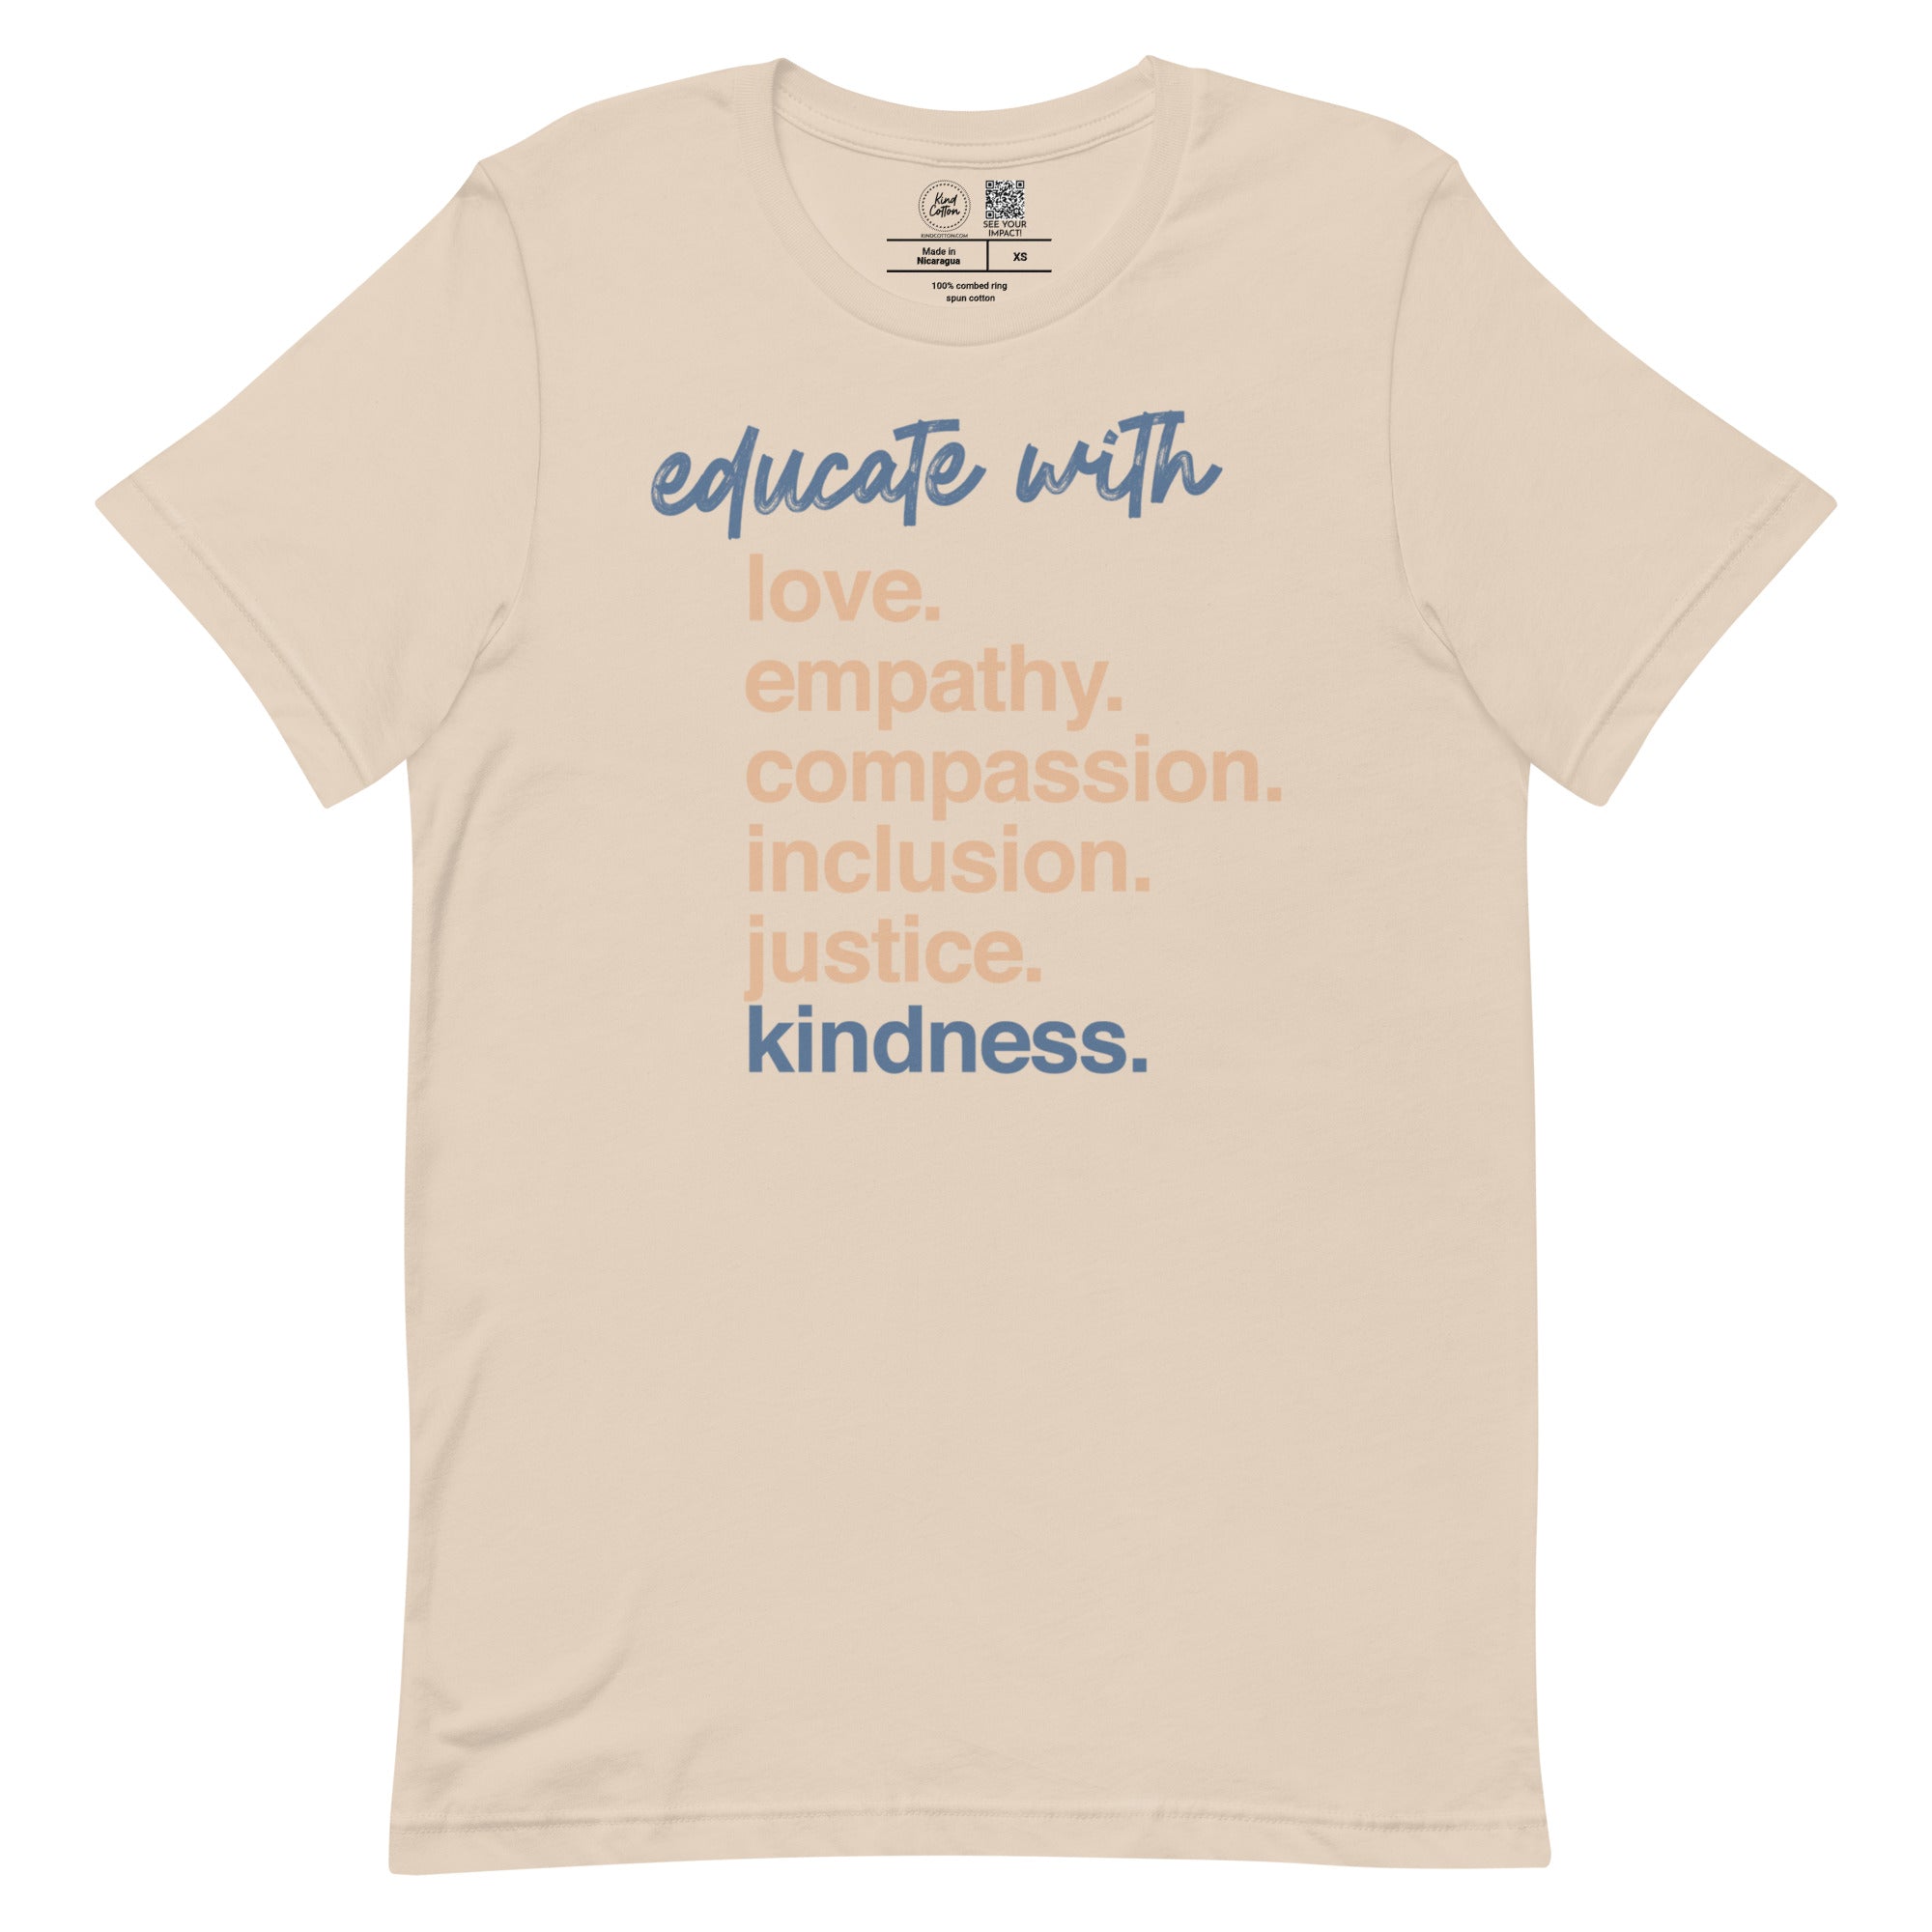 Educate with Kindness Classic Tee